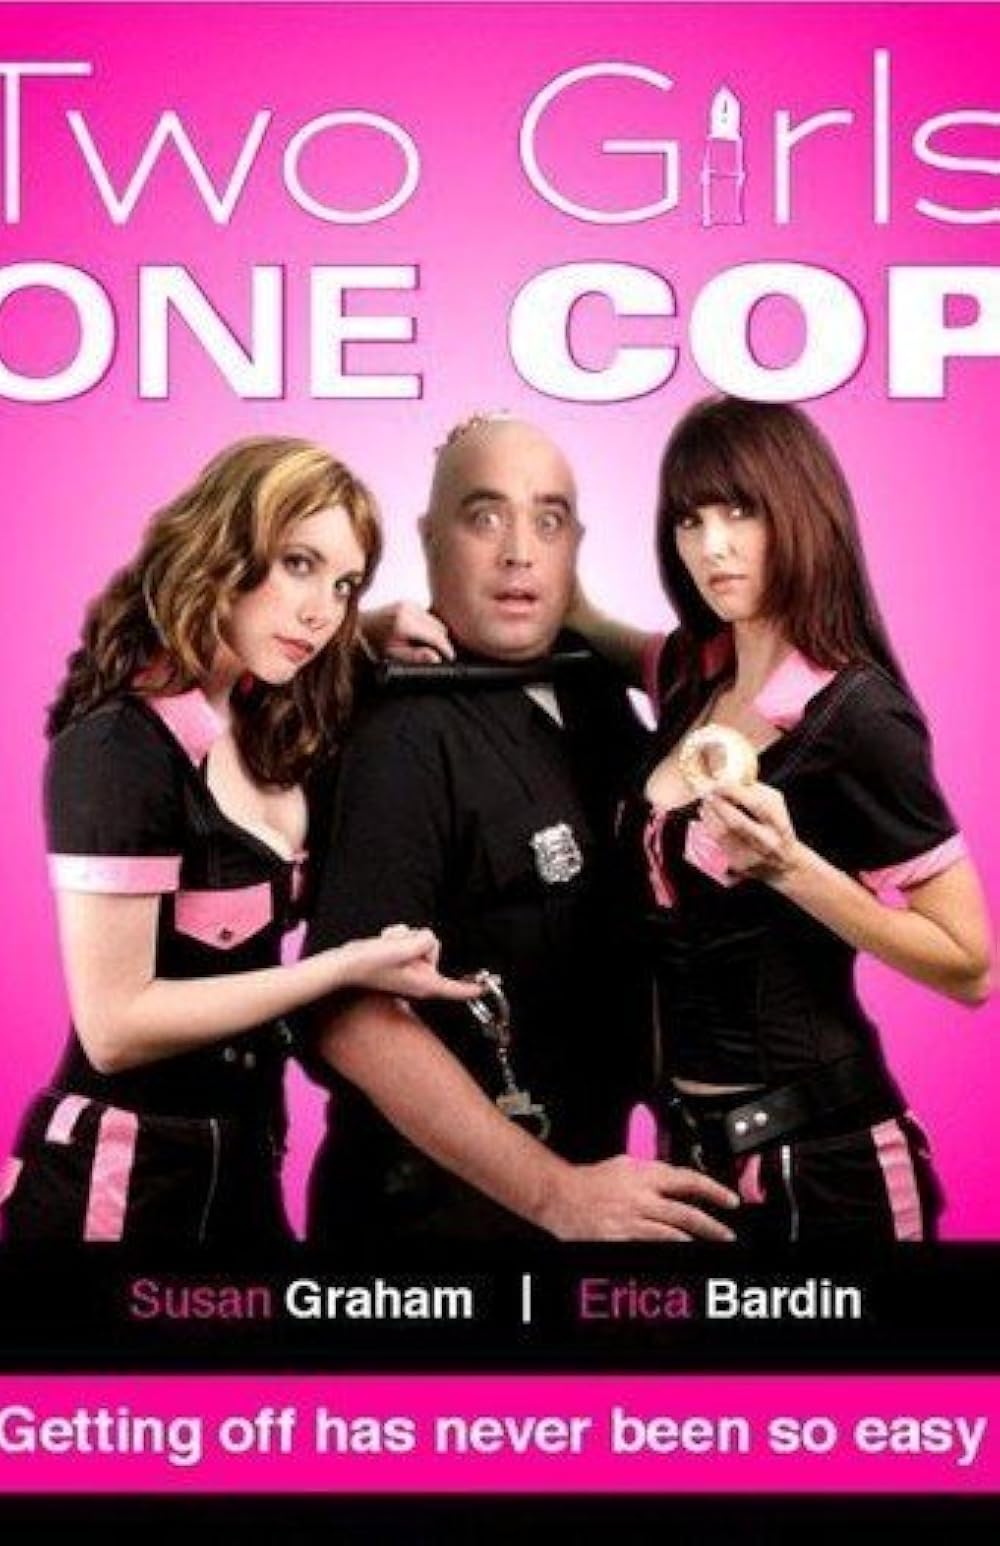 debra brindle recommends two girls one cop pic